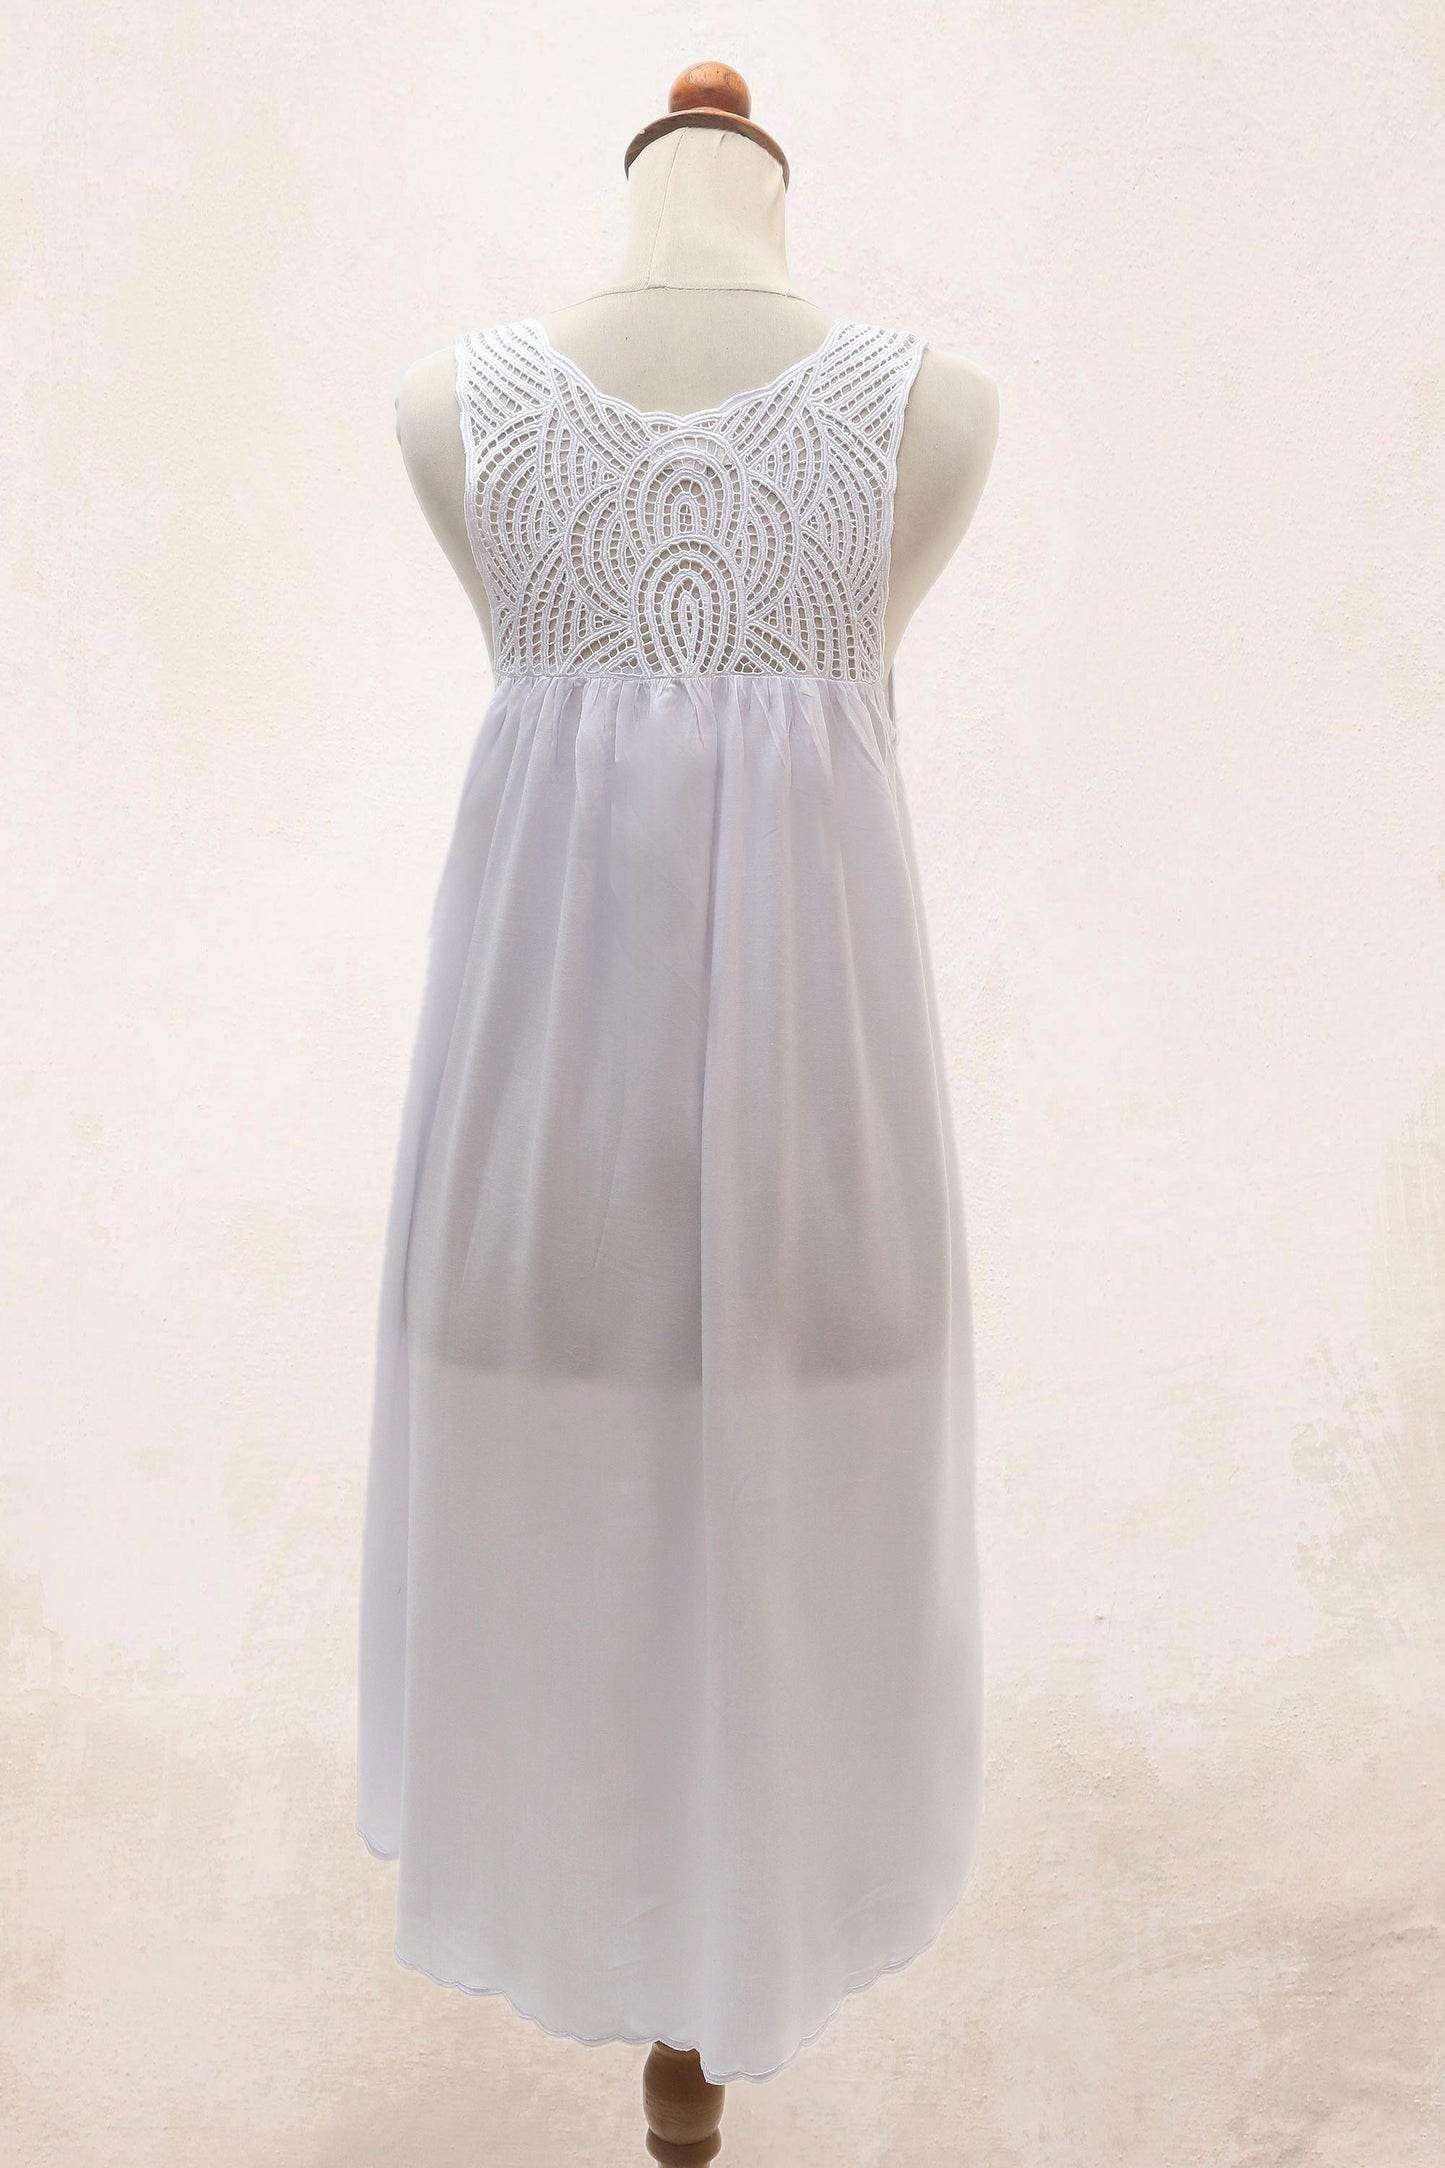 Drifting Clouds in White Hand Embroidered White Cotton Dress